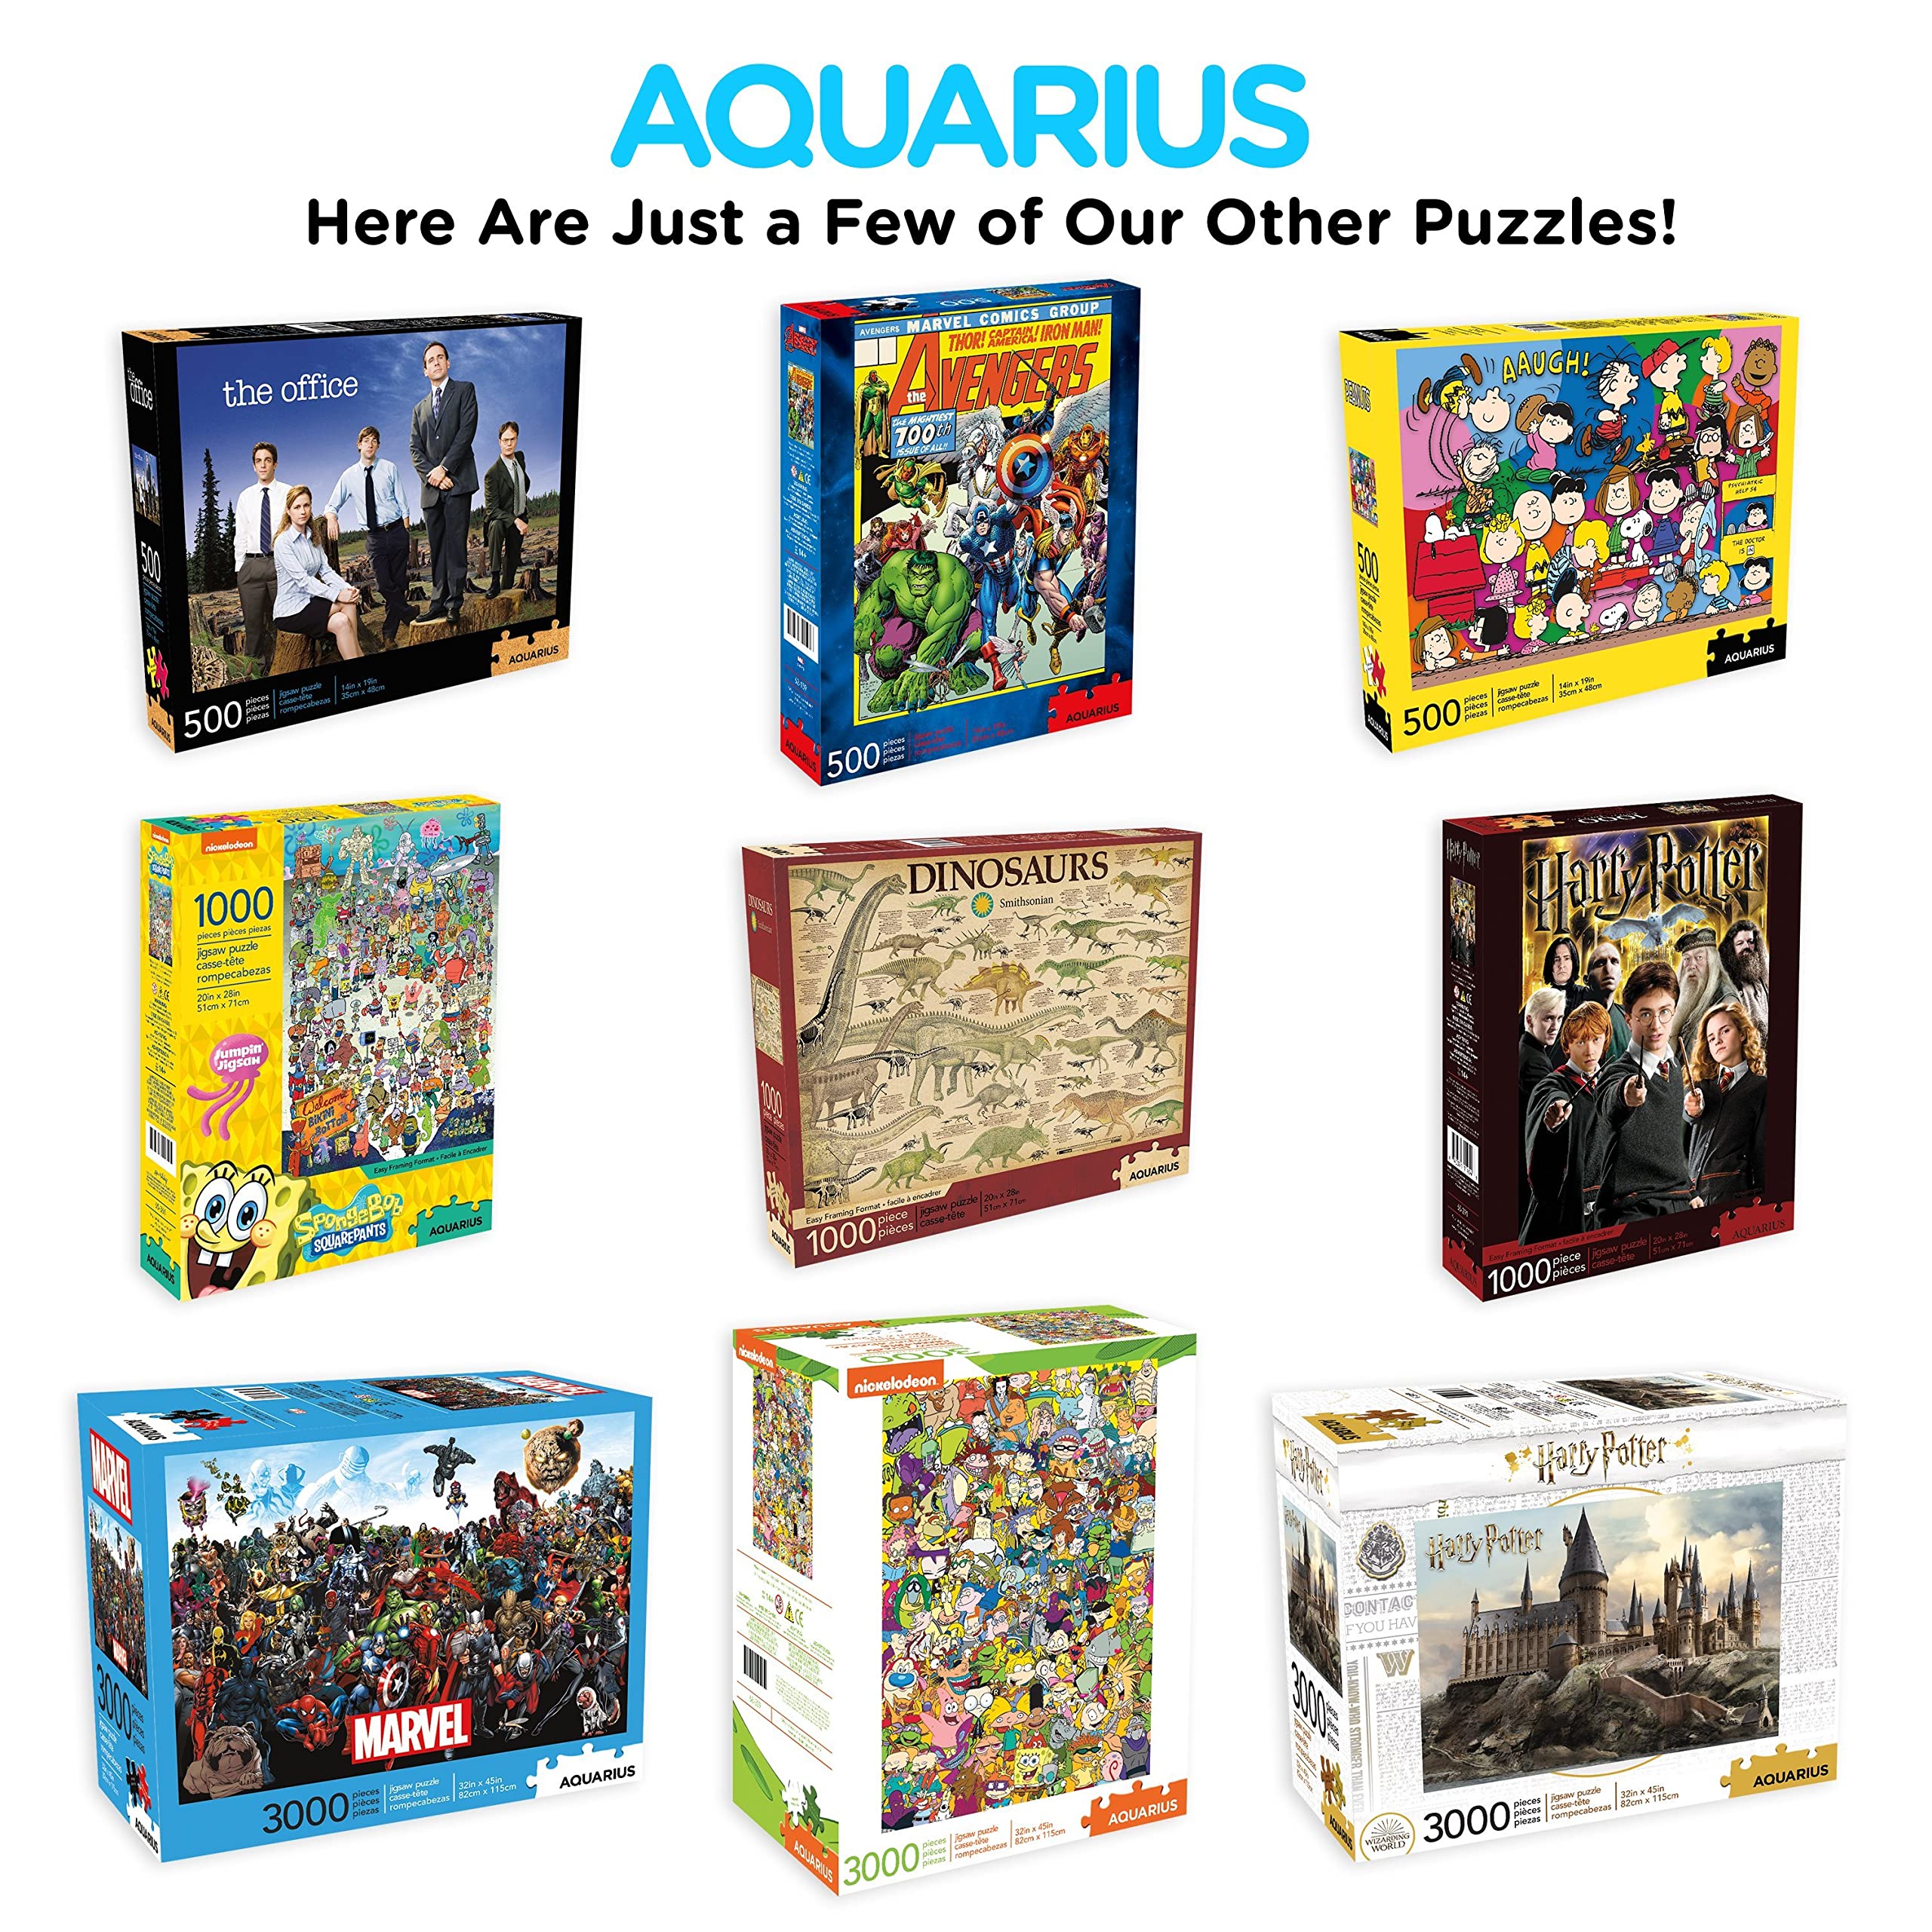 AQUARIUS Harry Potter Puzzle Diagon Alley (1000 Piece Jigsaw Puzzle) - Officially Licensed Harry Potter Merchandise & Collectibles - Glare Free - Precision Fit - 20x28in